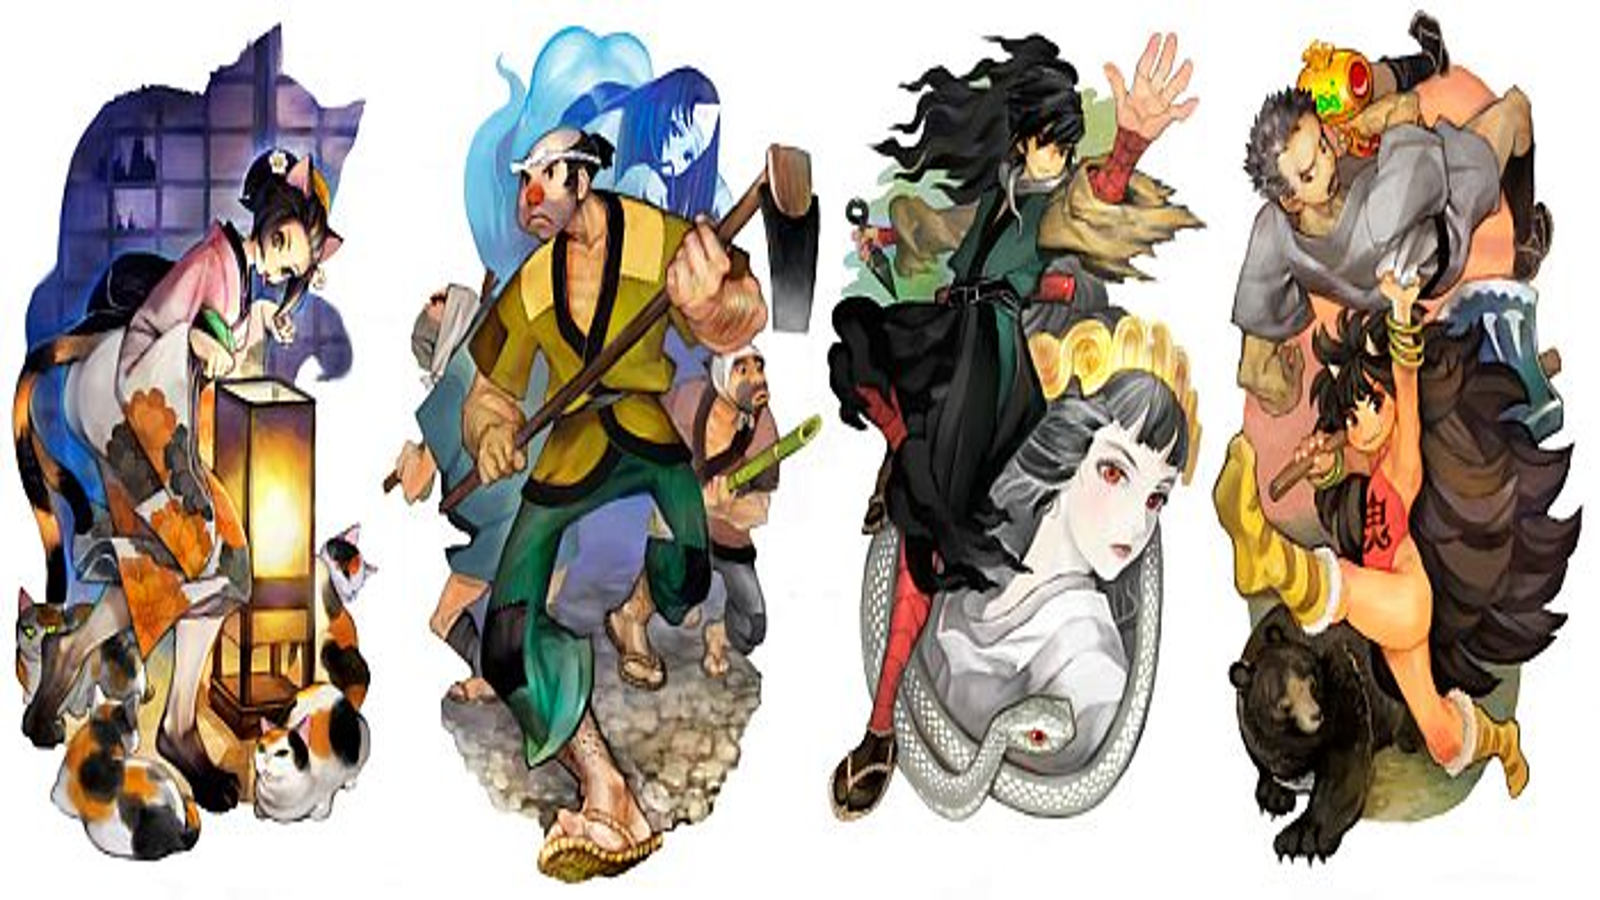 Muramasa Rebirth 'Genroku Legends' DLC Now Available in North